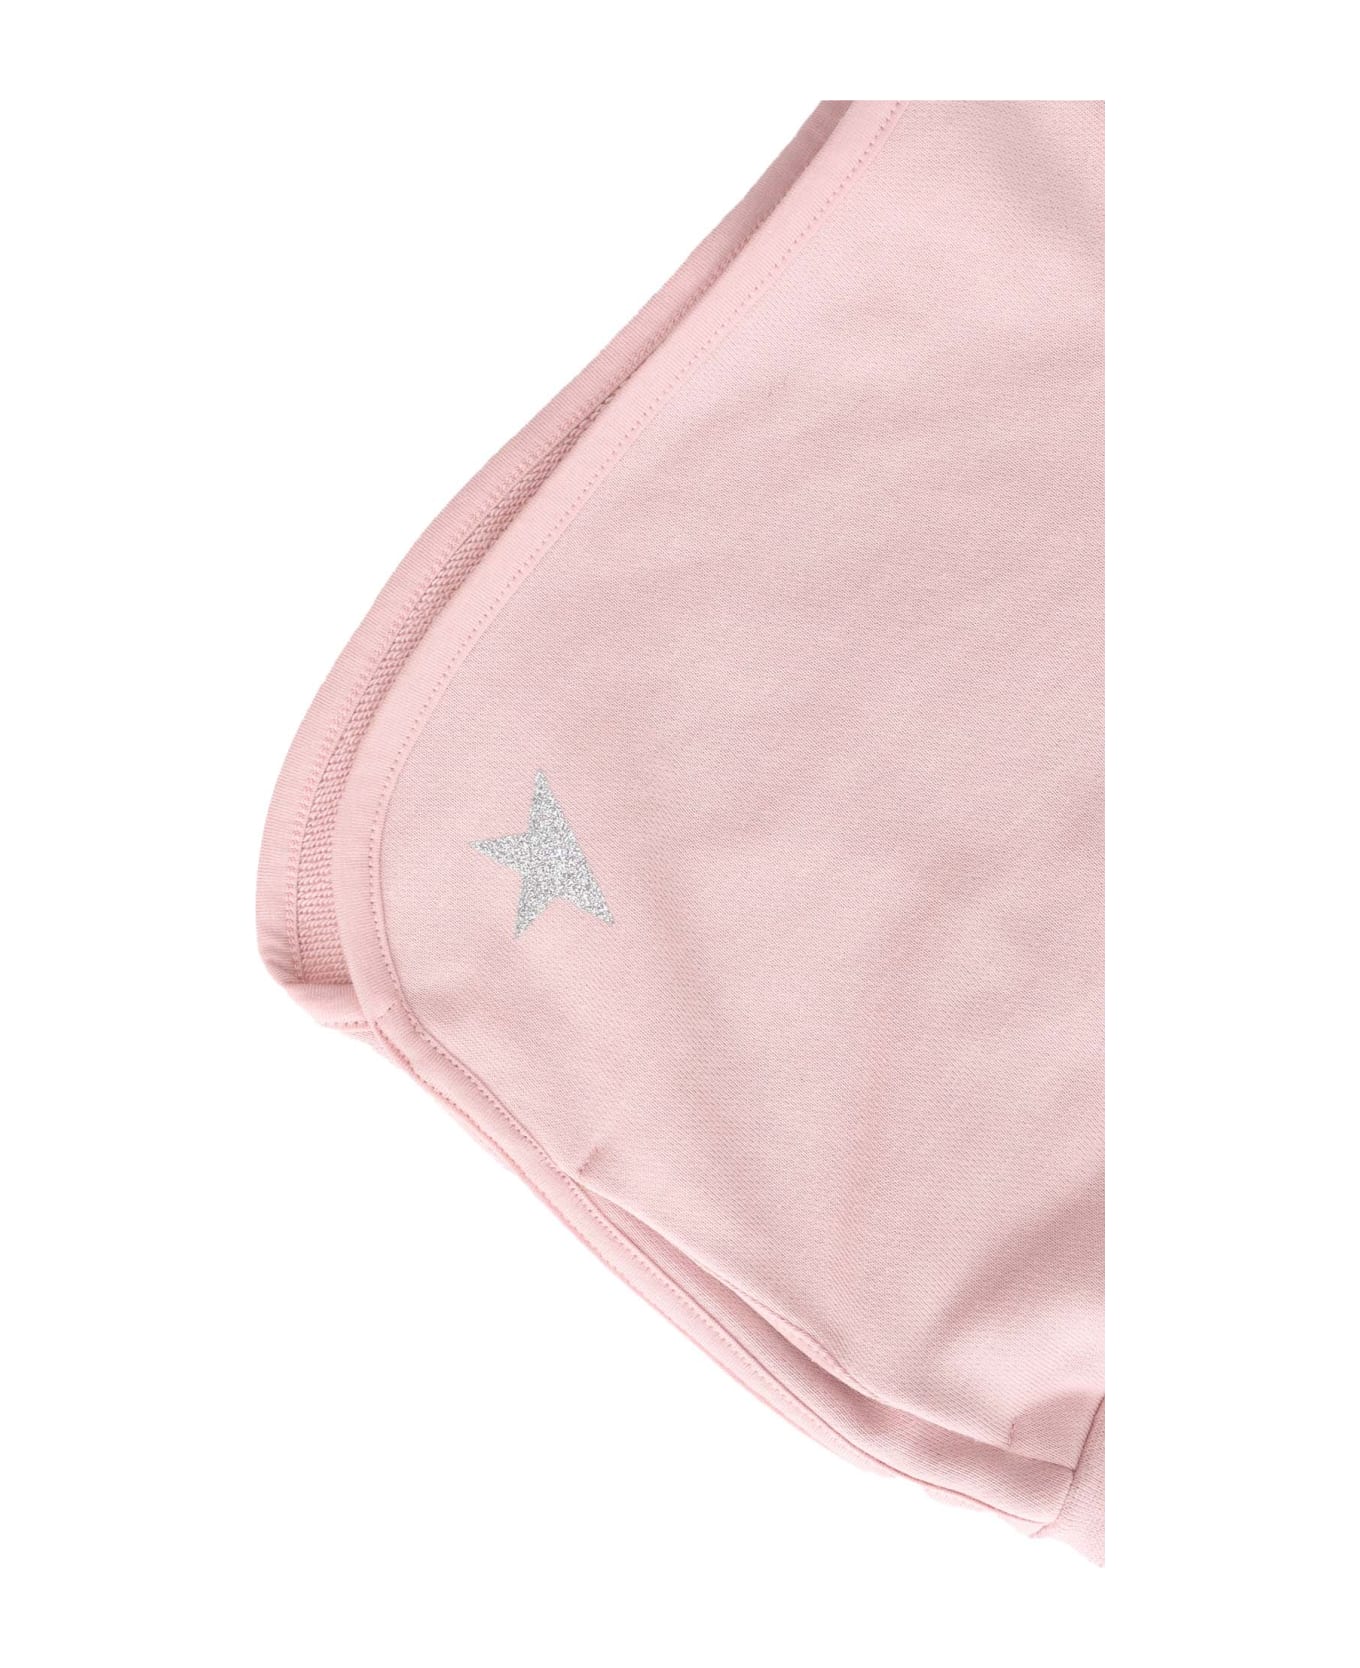 Golden Goose Terry Shorts - PINK ボトムス